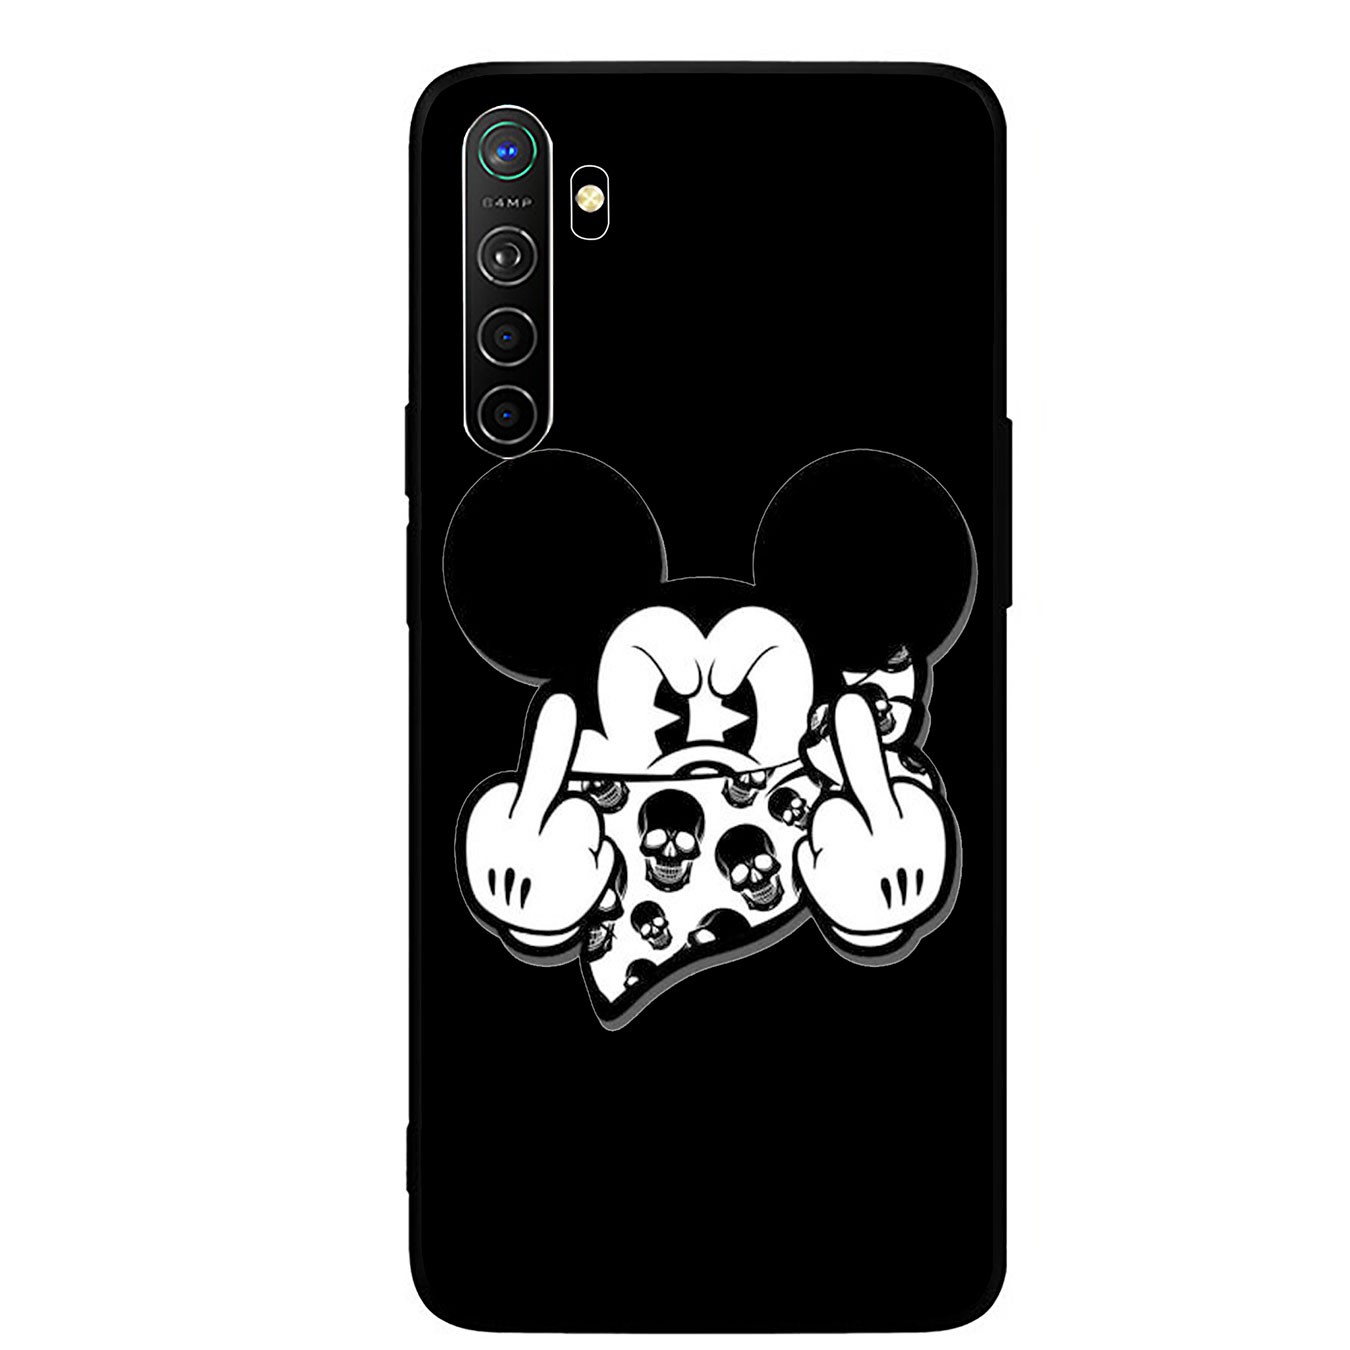 Samsung Galaxy S21 Ultra S8 Plus F62 M62 A2 A32 A52 A72 S21+ S8+ S21Plus Casing Soft Silicone Mickey Mouse Funny Phone Case